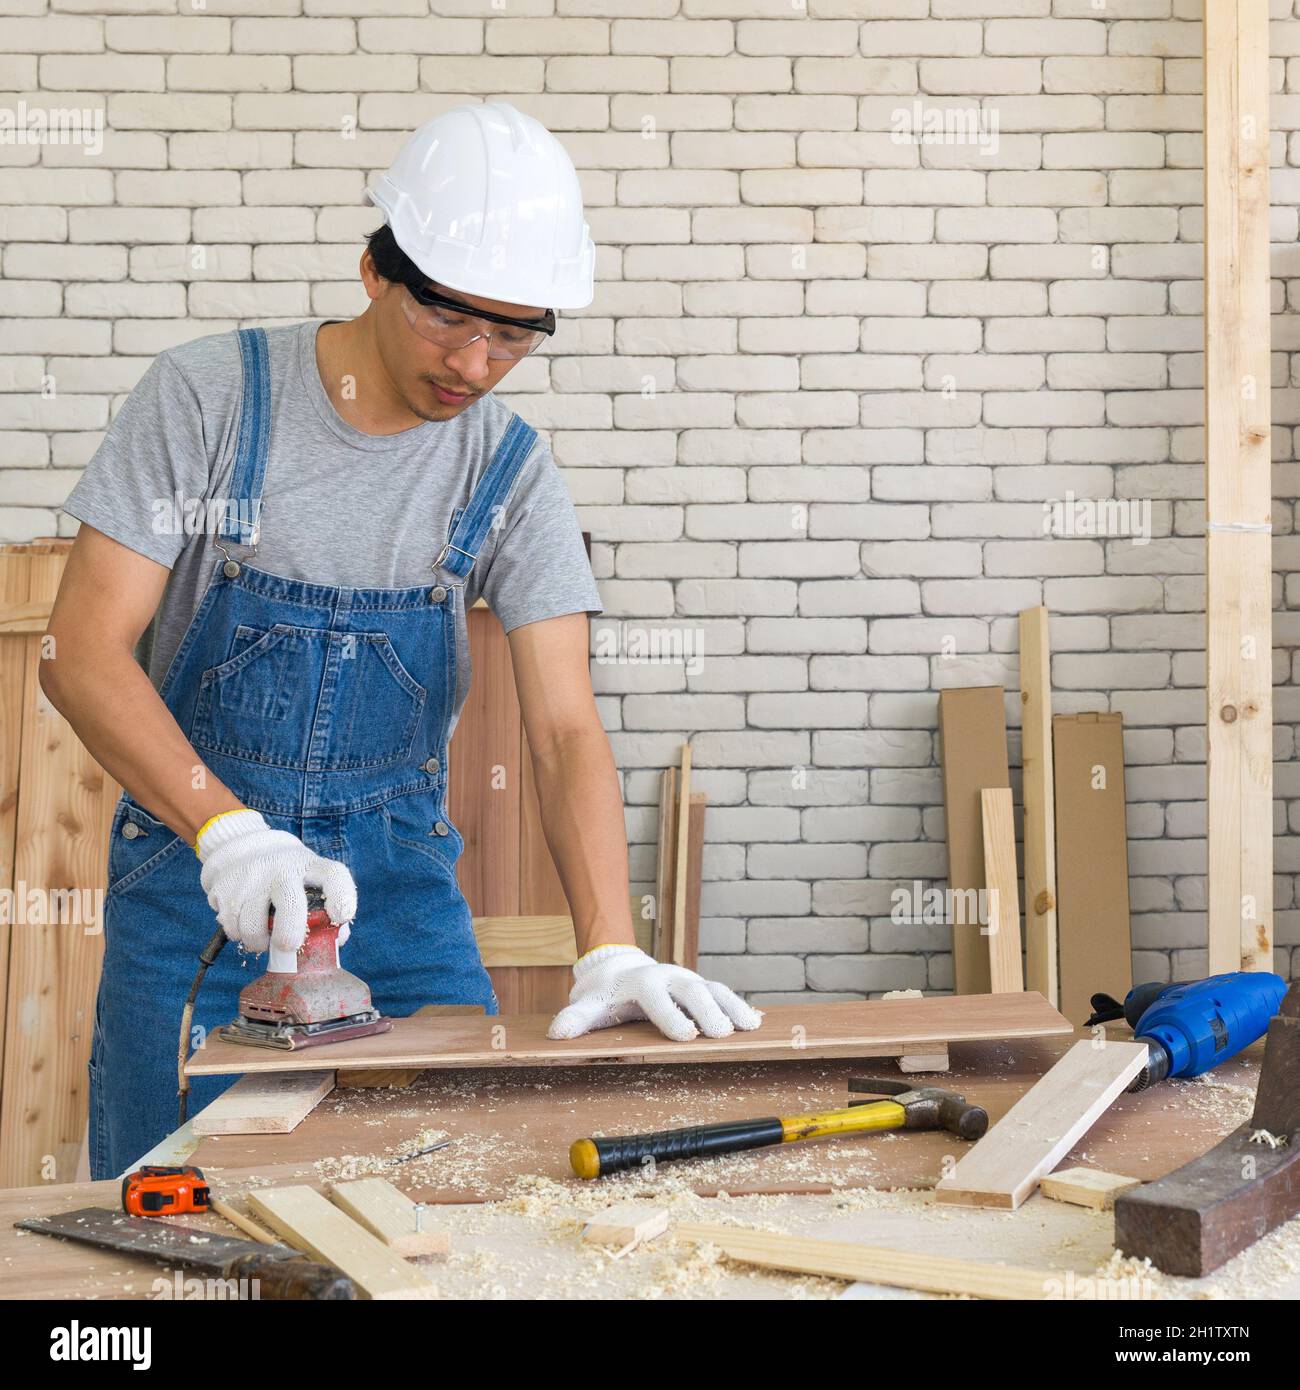 Asian carpenter with a hard hat and dustproof glasses use a sander machine to smooth plywood surface by abrasion with sandpaper. Morning work atmosphe Stock Photo